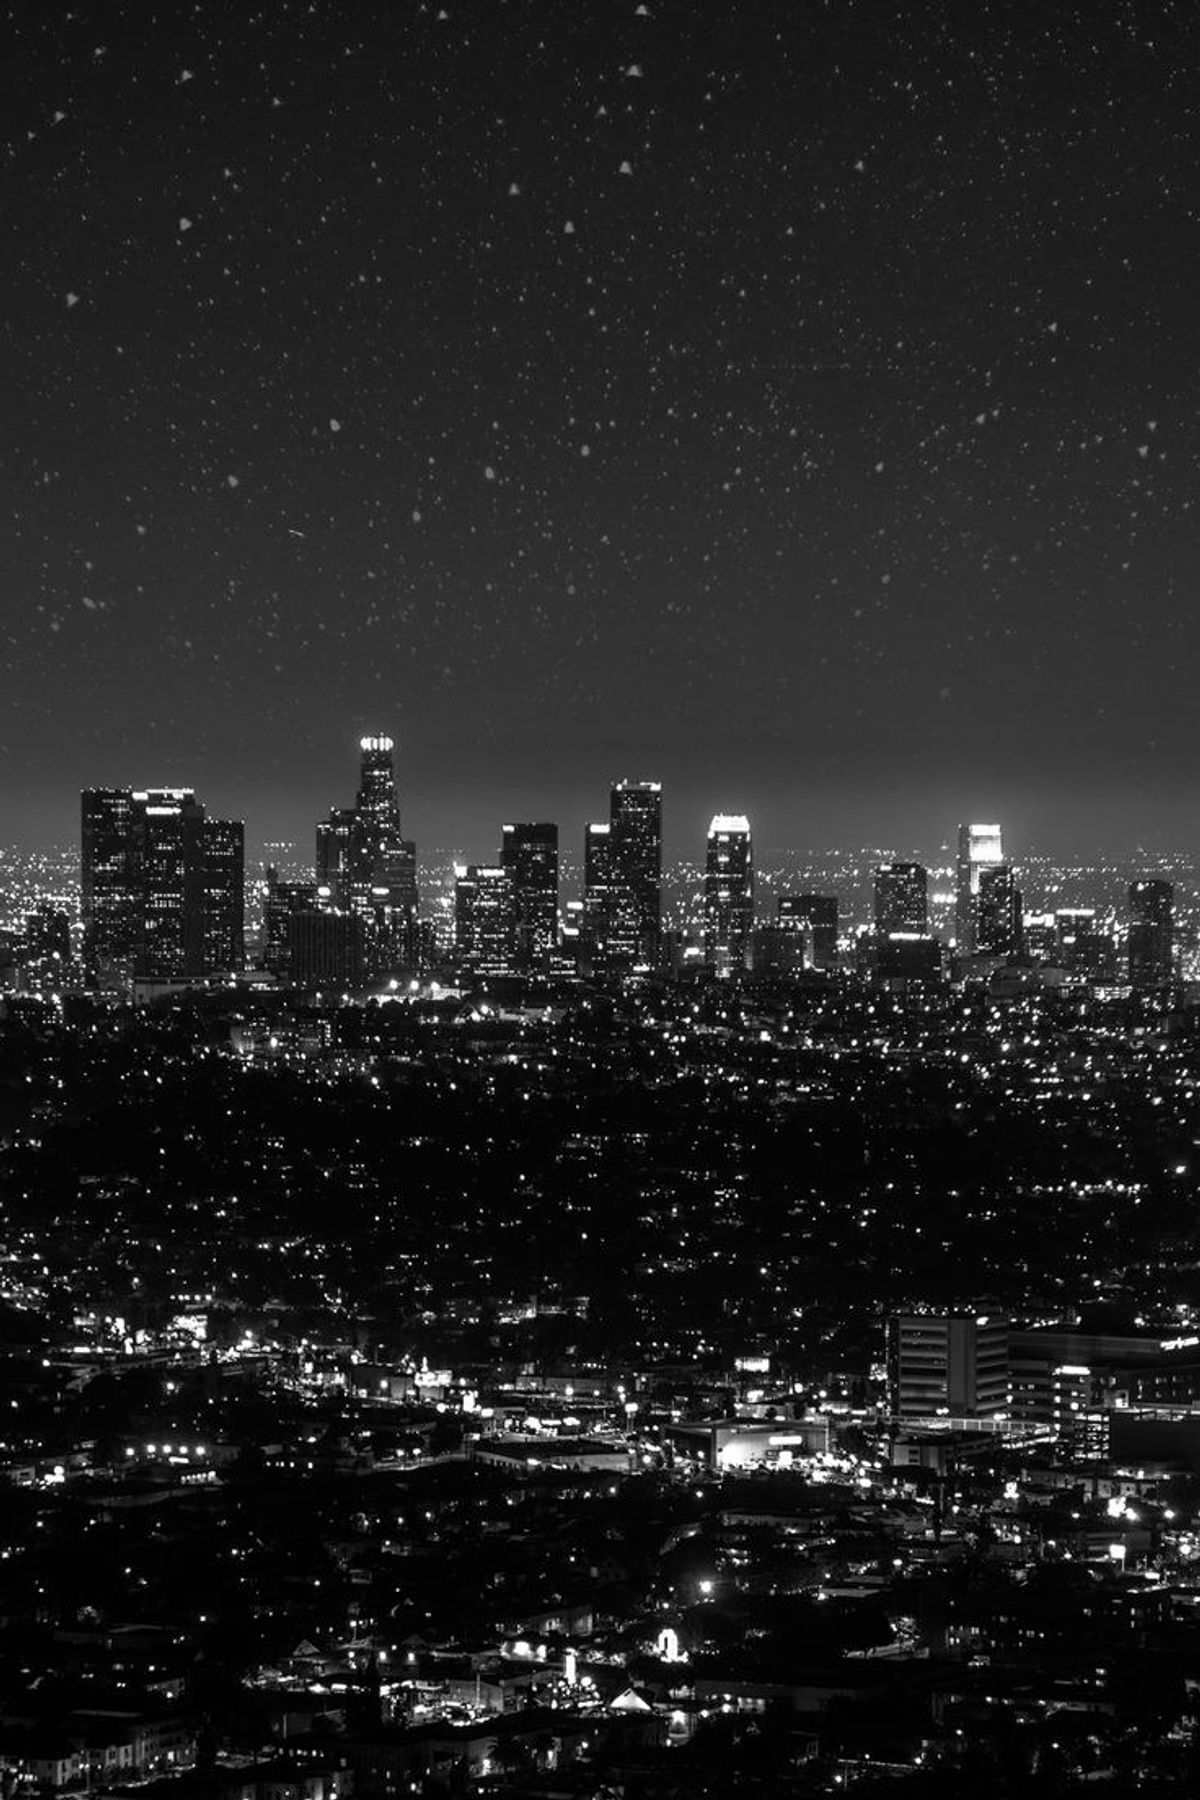 How to See All of L.A. in 7 Seconds